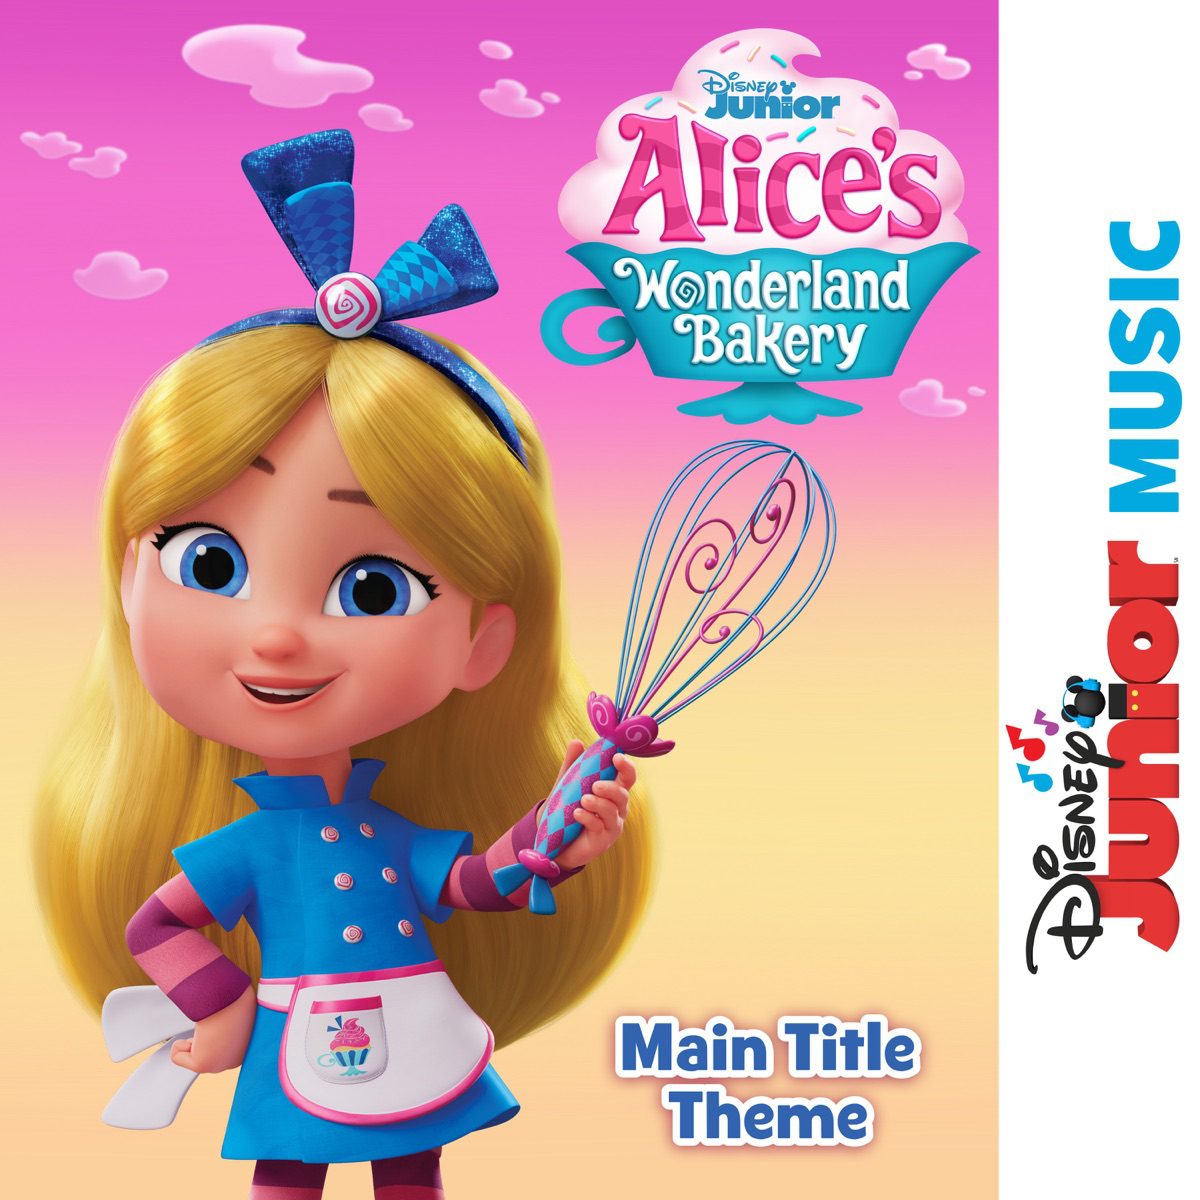 https://static.wikia.nocookie.net/international-entertainment-project/images/1/11/Alice%27s_Wonderland_Bakery_theme_song.png/revision/latest?cb=20231015195905